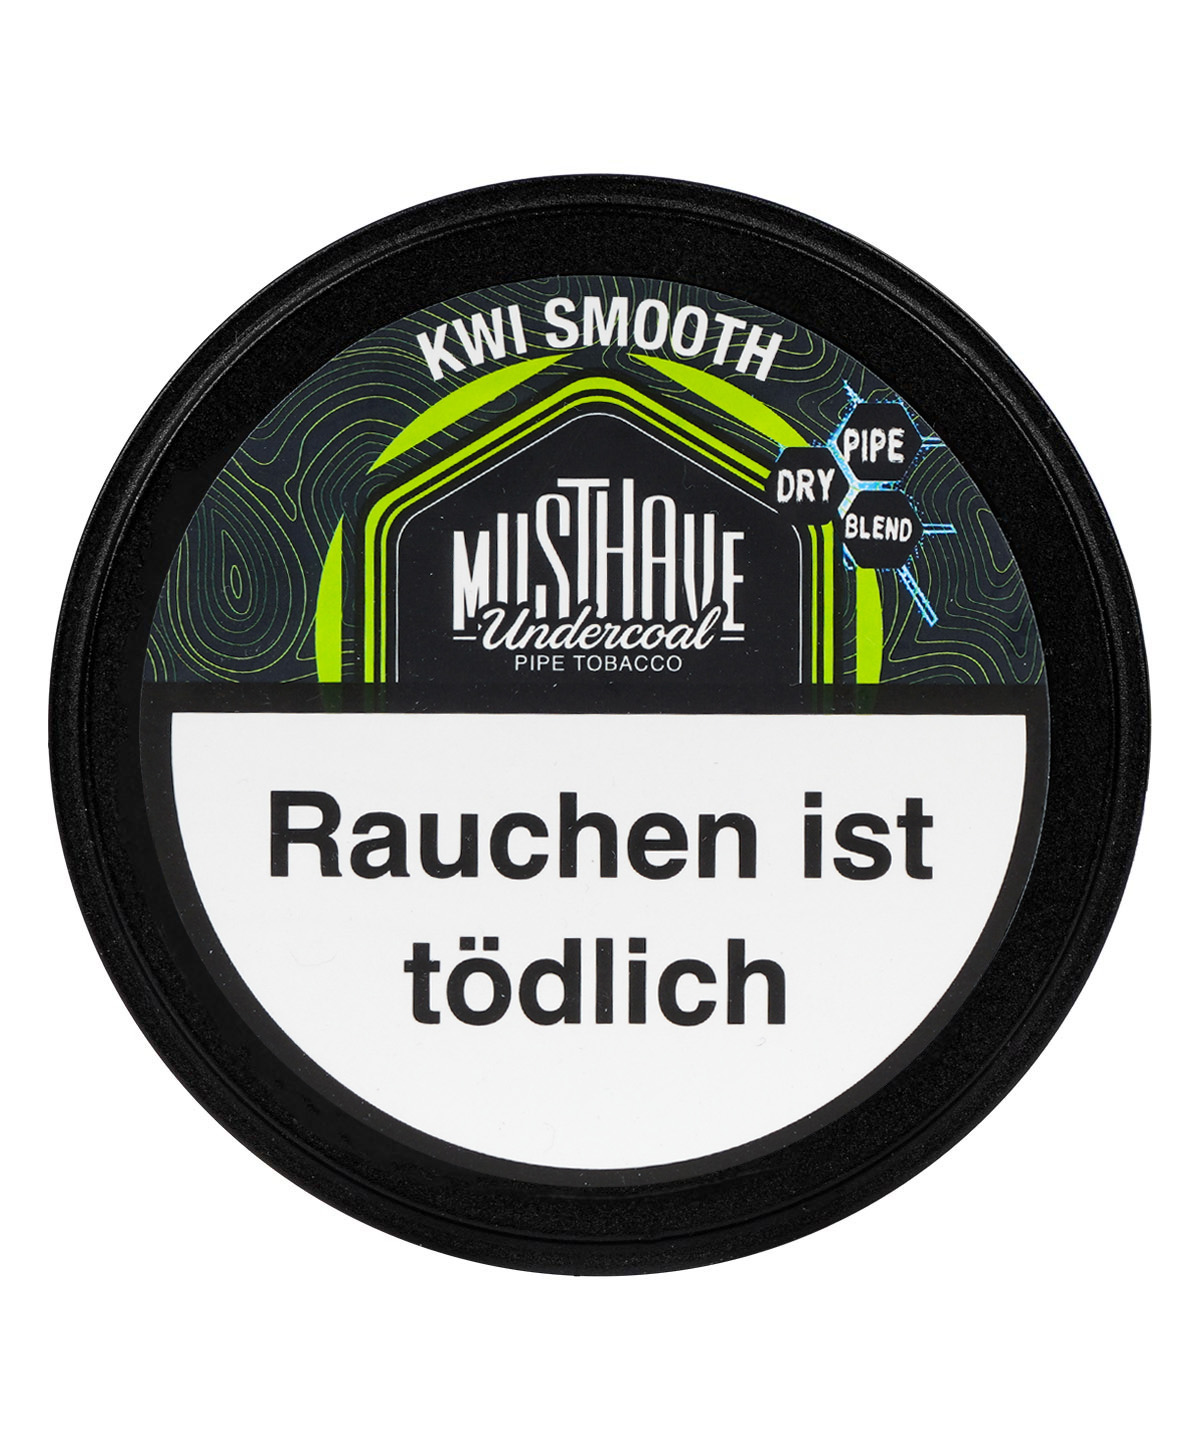 Musthave Kwi Smooth Dry Base 70g